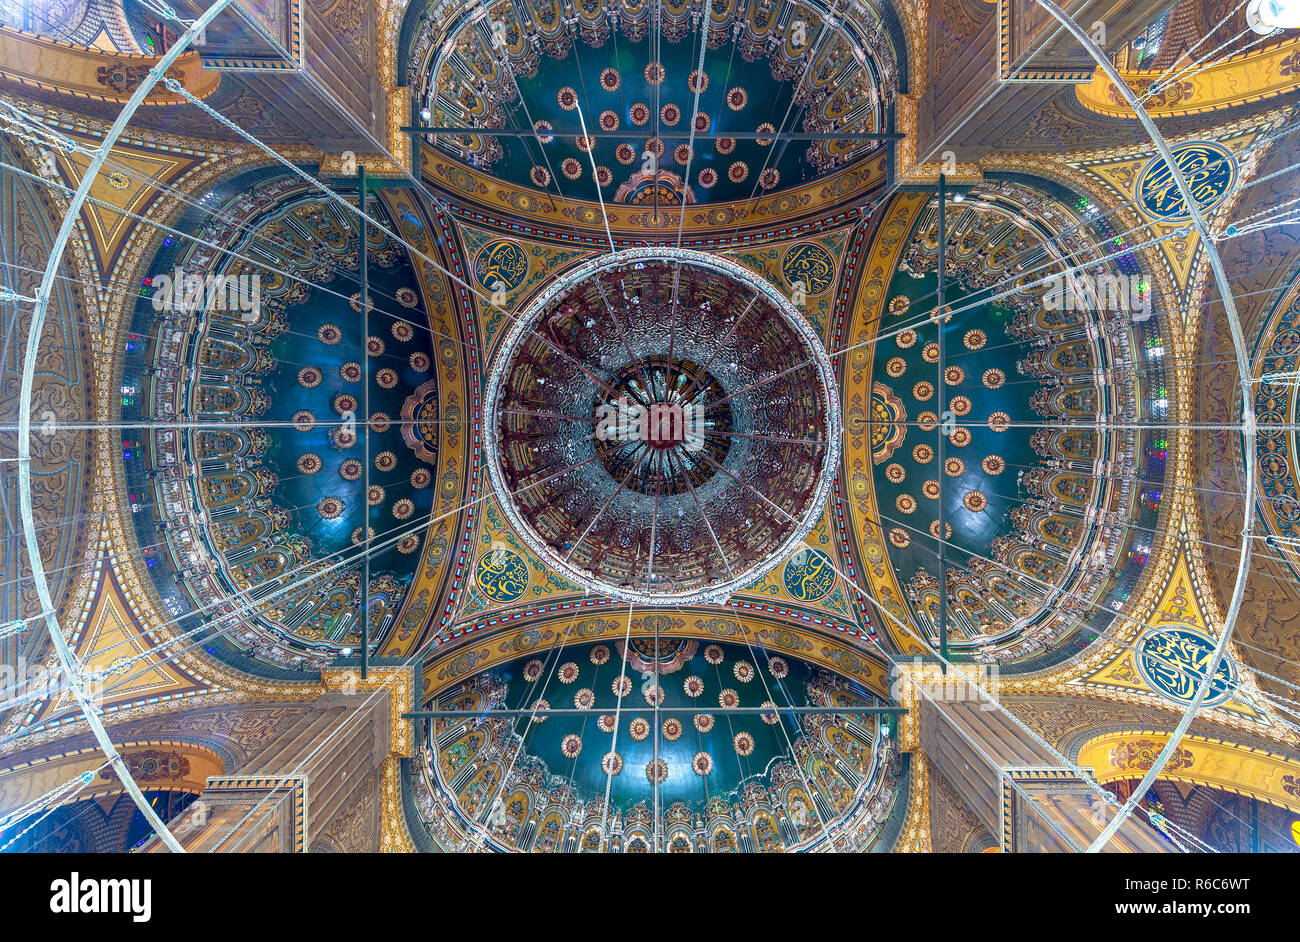 Ceiling of the great Mosque of Muhammad Ali Pasha (Alabaster Mosque) decorated with golden and blue floral patterns, situated in the Citadel of Cairo  Stock Photo